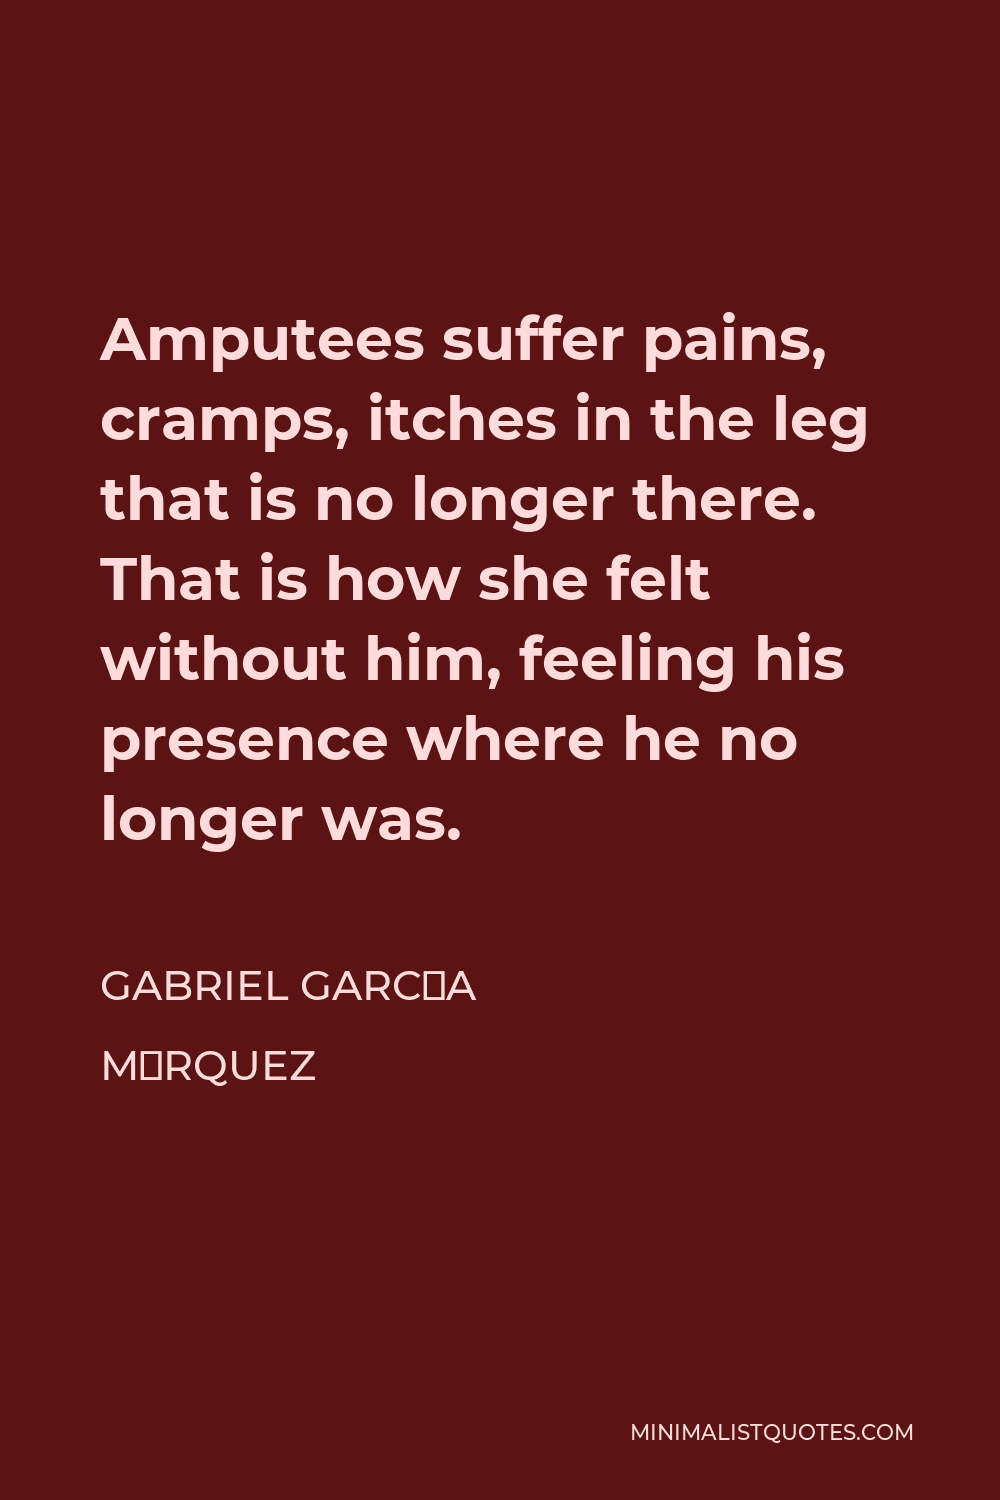 Gabriel García Márquez Quote - Amputees suffer pains, cramps, itches in the leg that is no longer there. That is how she felt without him, feeling his presence where he no longer was.